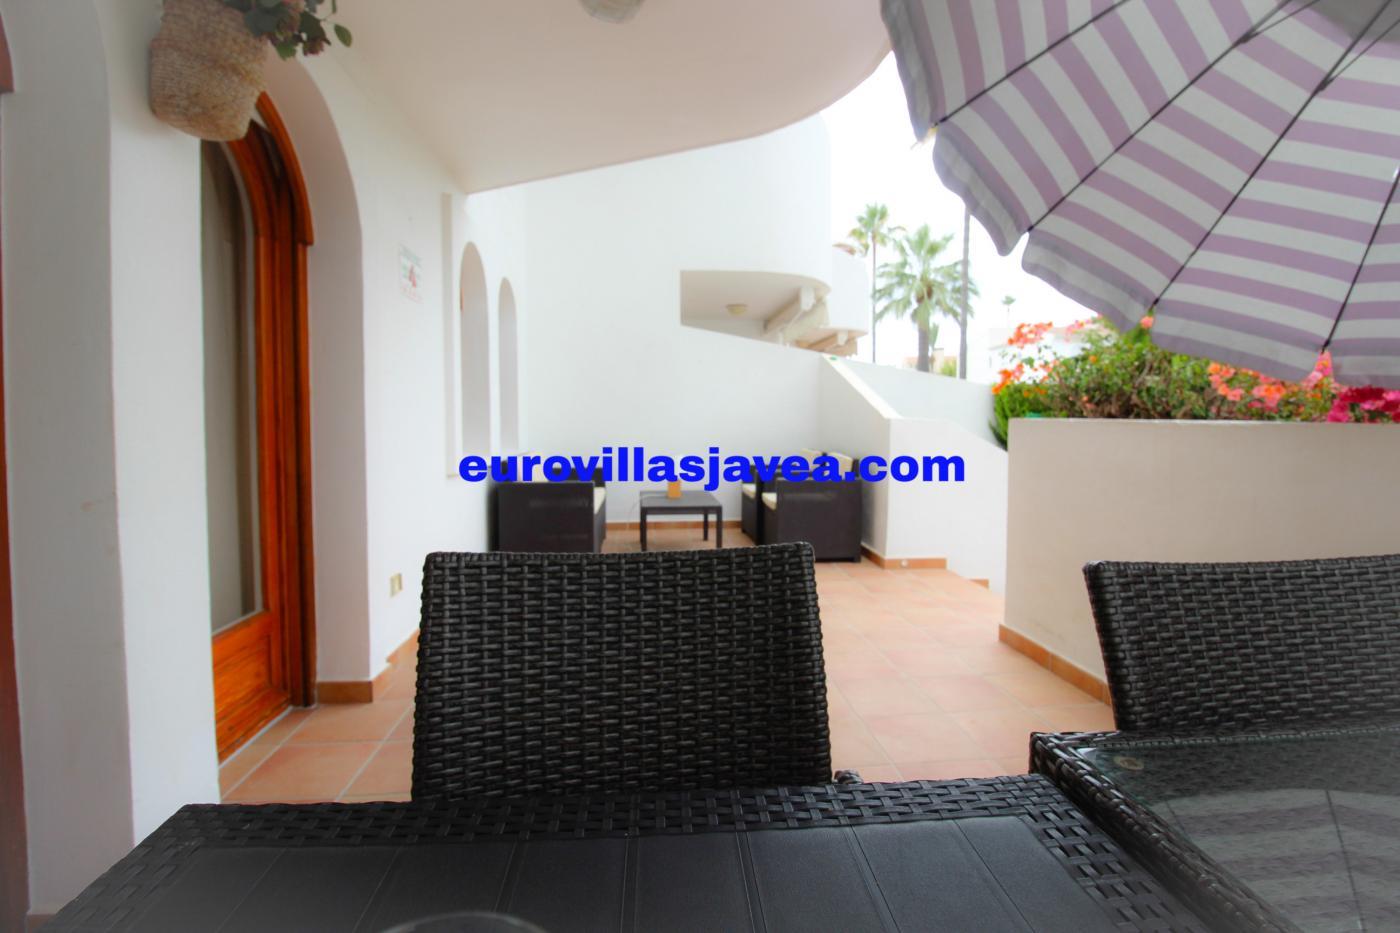 Apartment for WINTER rent in Jávea